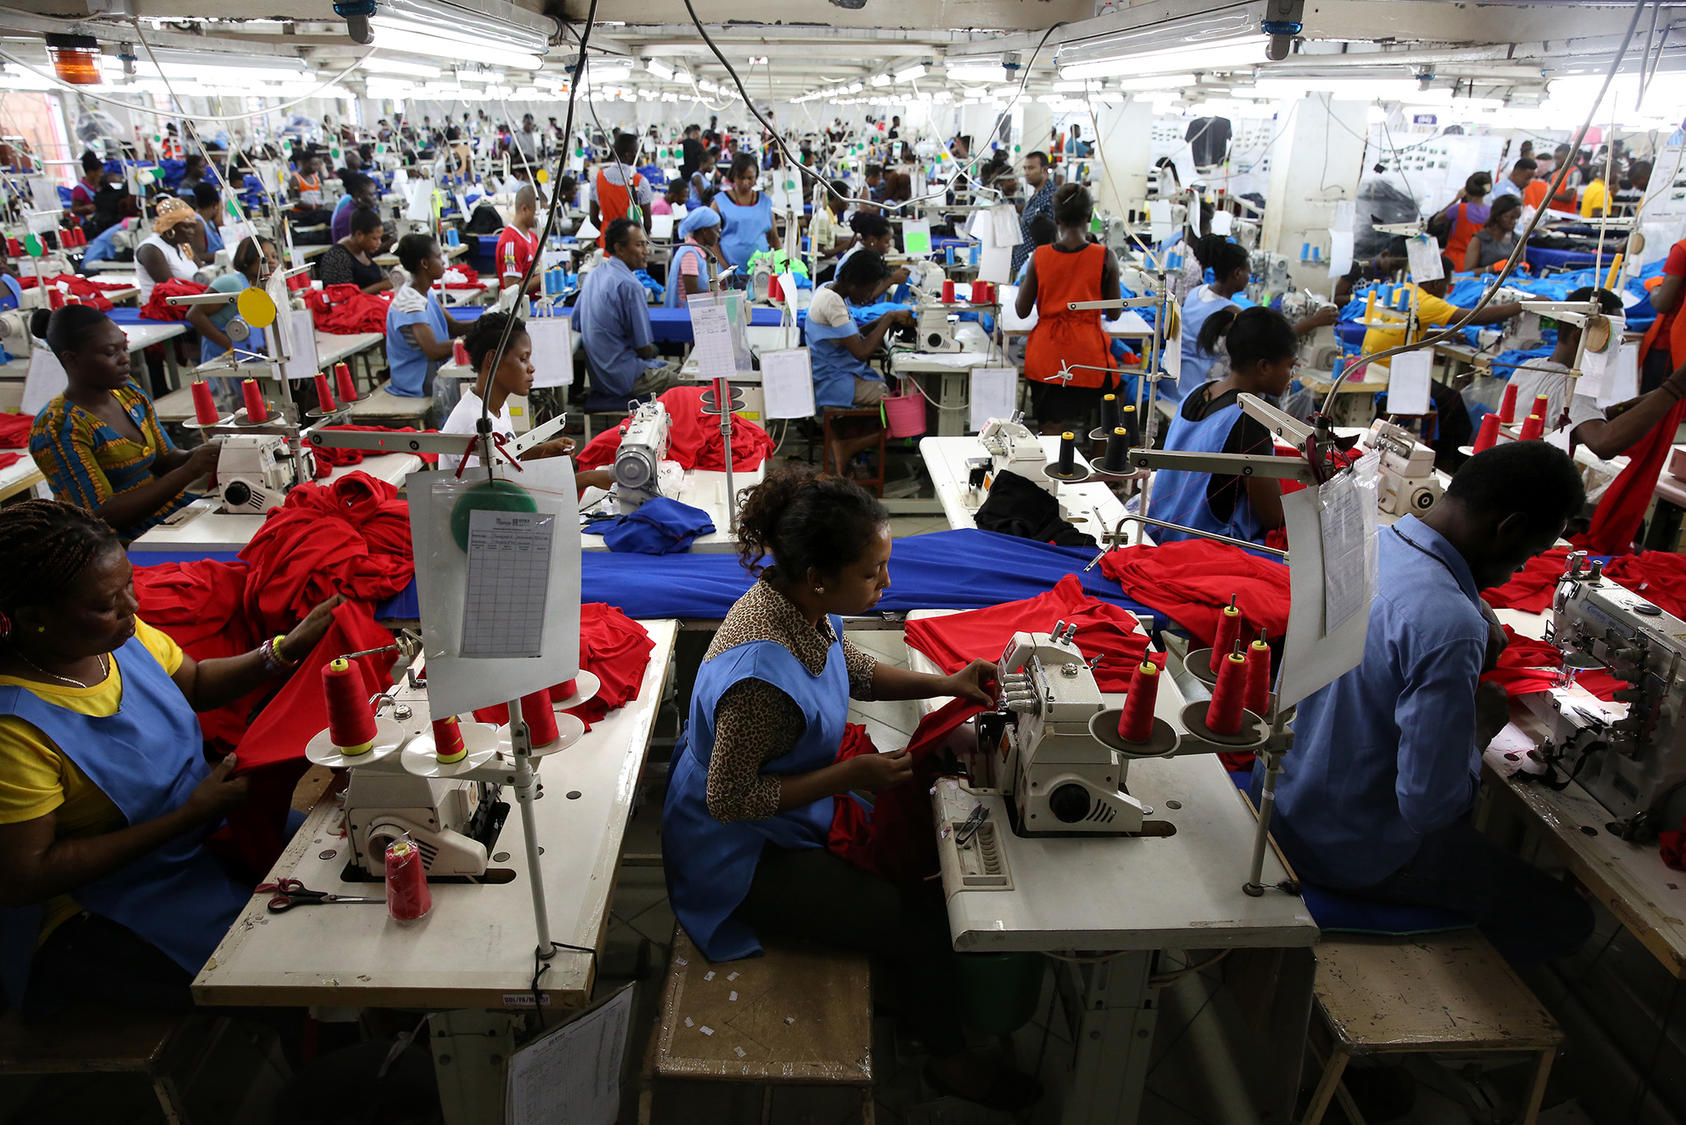 Ghanaians sew shirts for export at Dignity DTRT, a factory in Accra funded largely by U.S. investors. The firm trains and employs thousands of people in an economy whose growth is vital to sustaining Ghana’s 30-year democracy. (Dominic Chavez/World Bank)